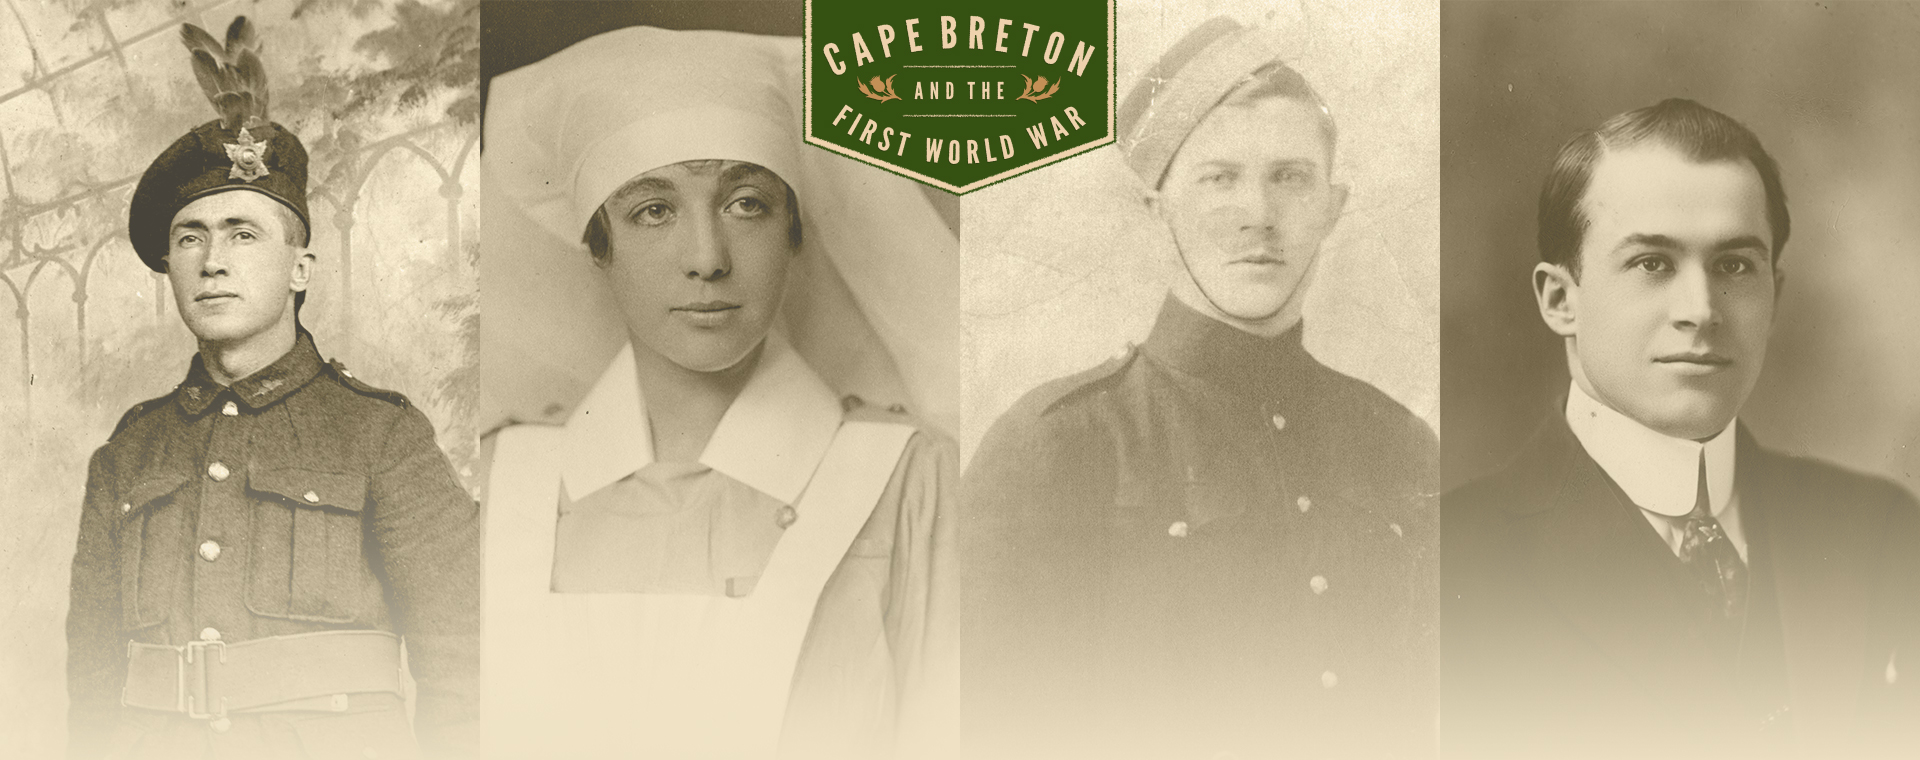 Composite image of four individual portraits of a tunneller, nursing sister, soldier, and prisoner of war. The “Cape Breton and the First World War” logo is pictured in the top-centre of the image.